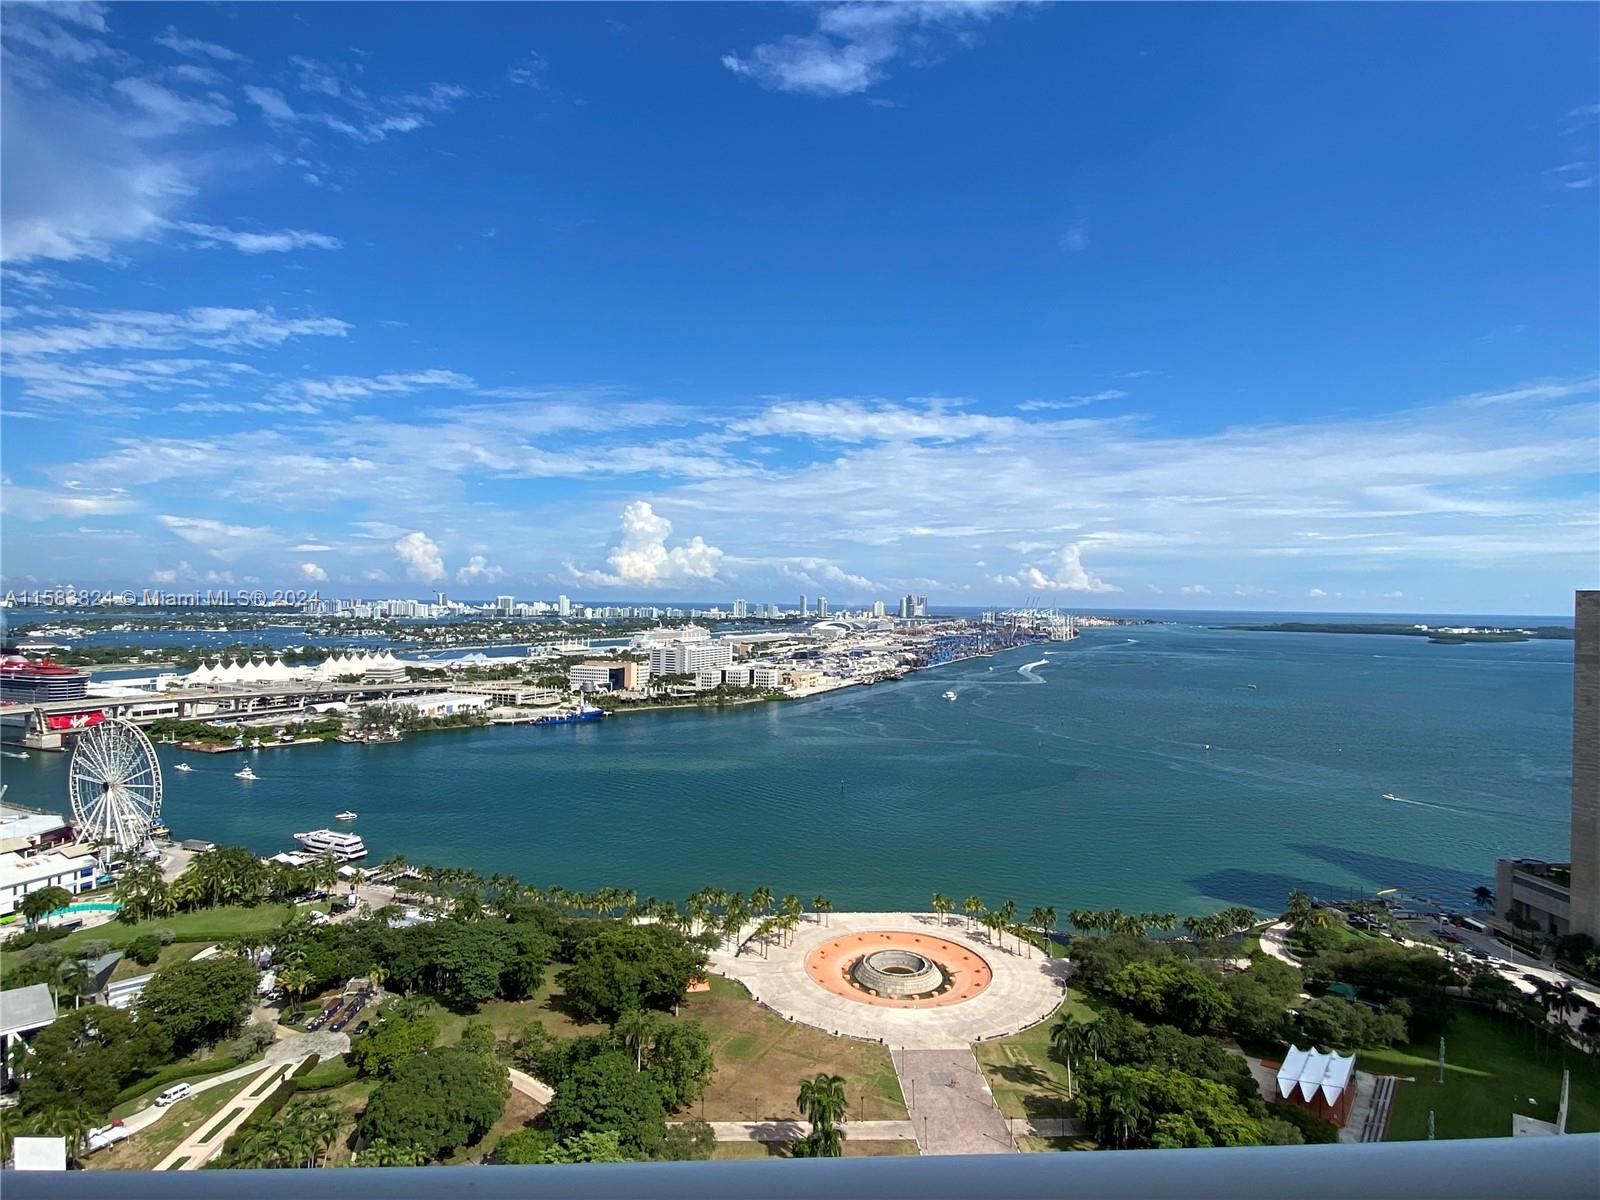 50 Biscayne Blvd. 2 beds 2 Baths plus Den (13x10). Marble floors, unit in mint condition with direct Bay Views. Rent includes basic TV Cable/ Internet, one assigned parking space, EV charging stations, water, garbage and all of the amenities. Secured Building.